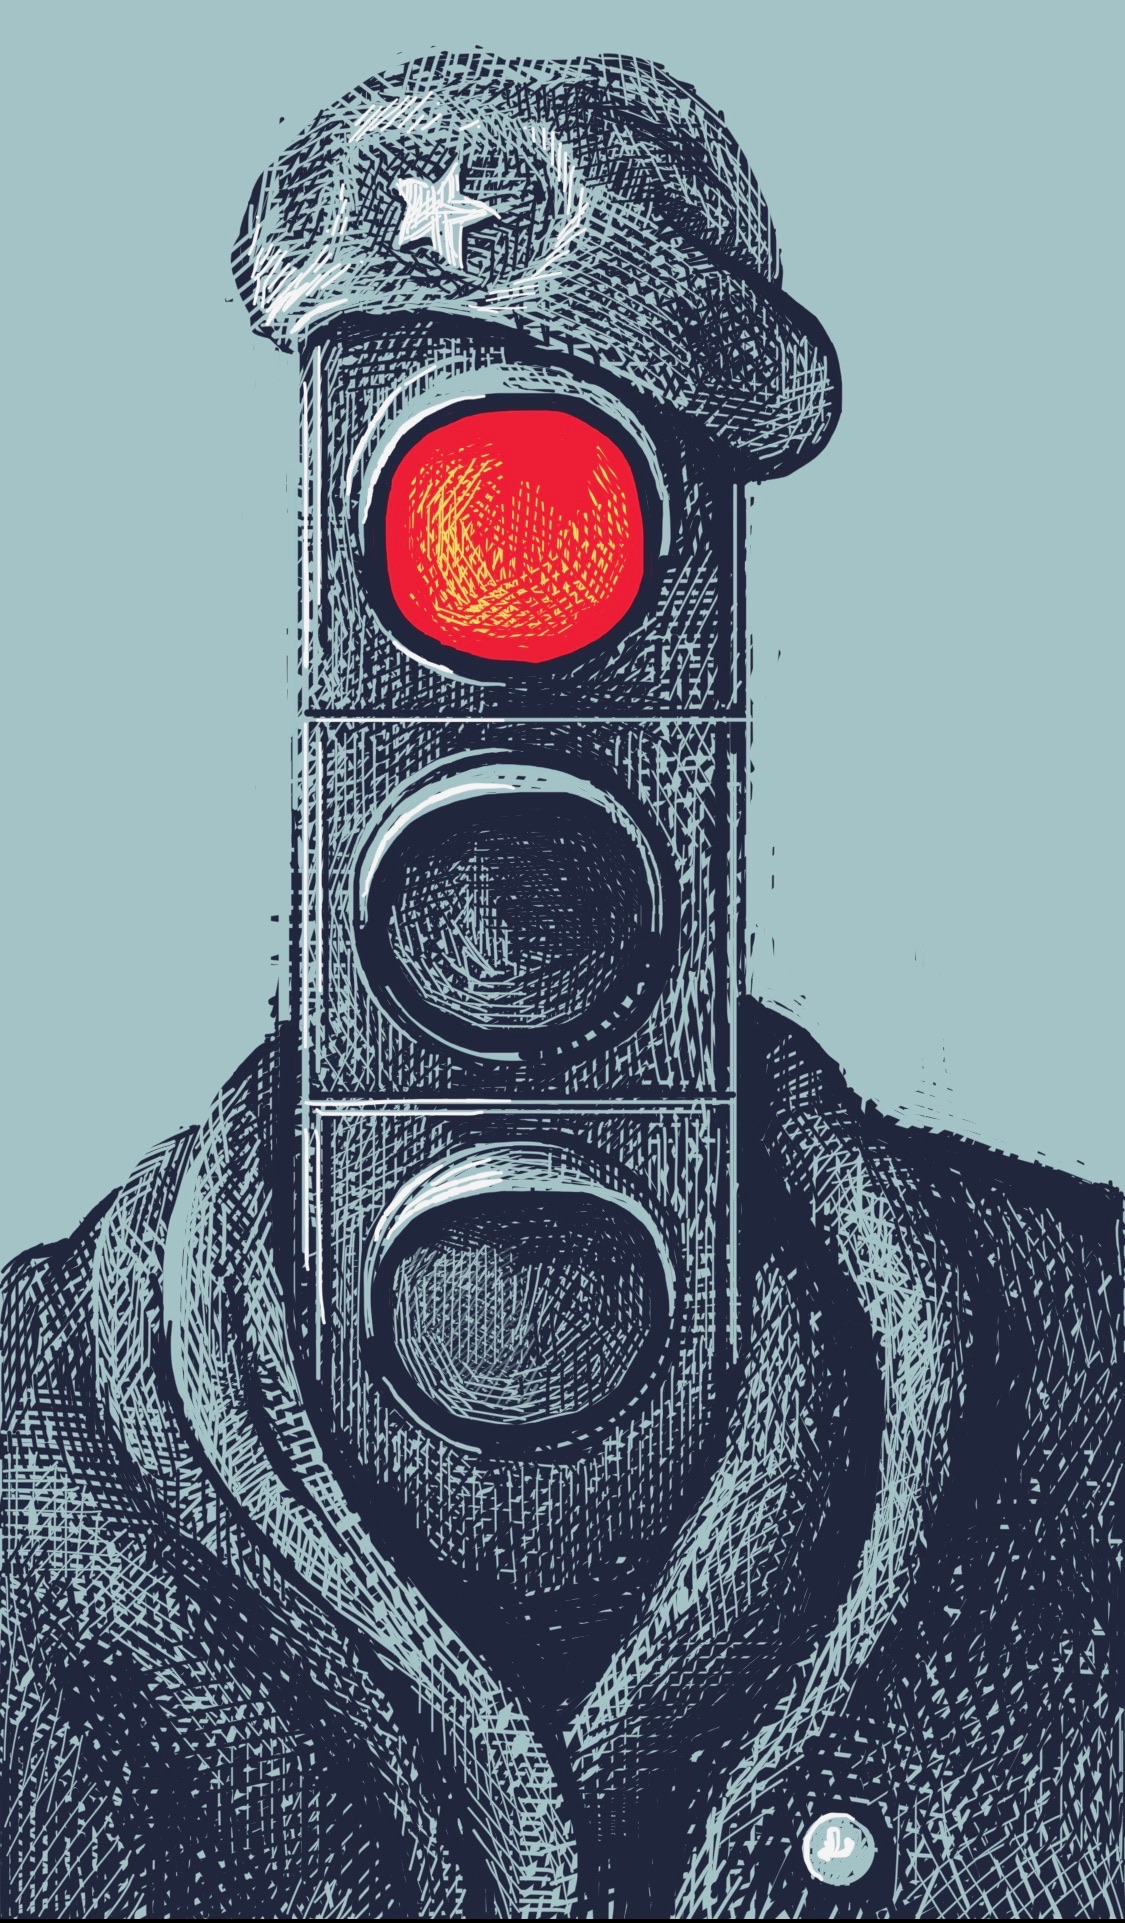 A traffic signal wearing a heavy winter coat and one of those furry hats that Russian soldiers wear in films about Siberia